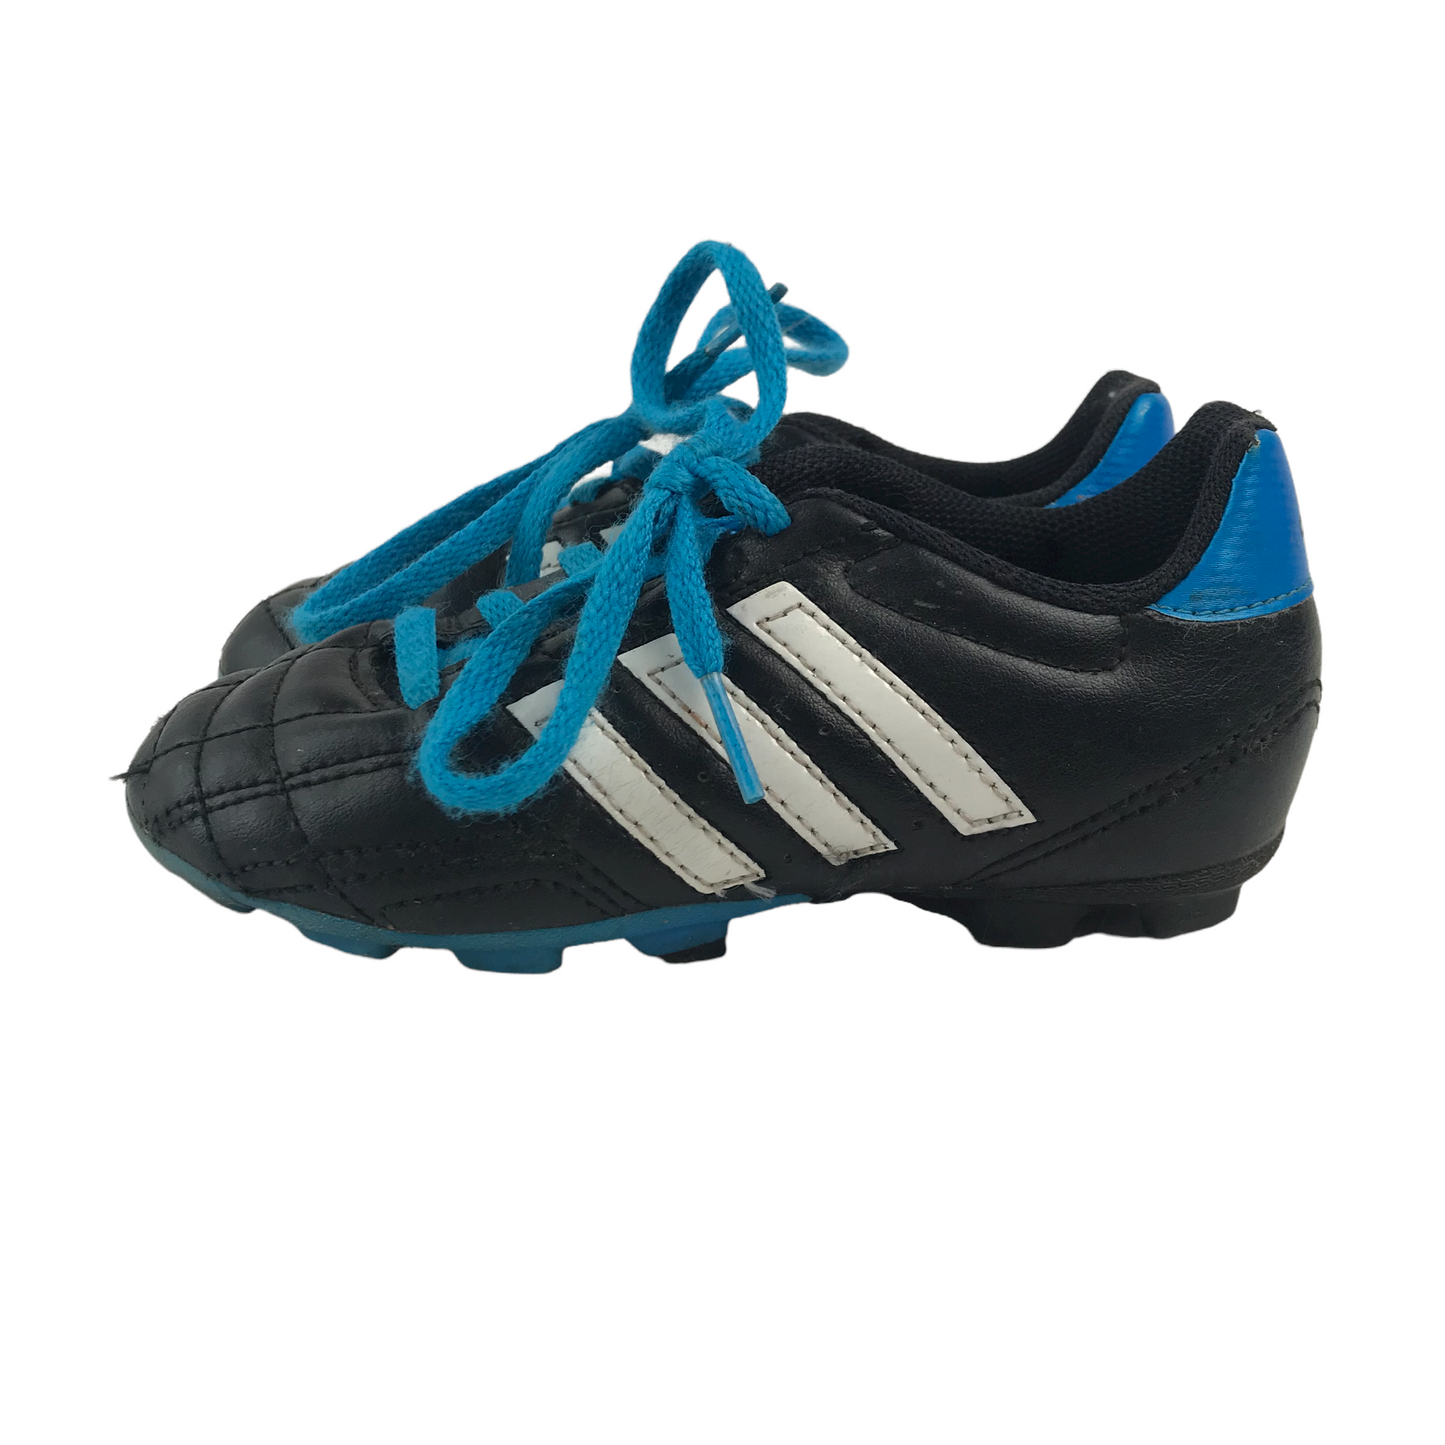 Adidas Black and Blue Football Boots Shoe Size 11K (jr)